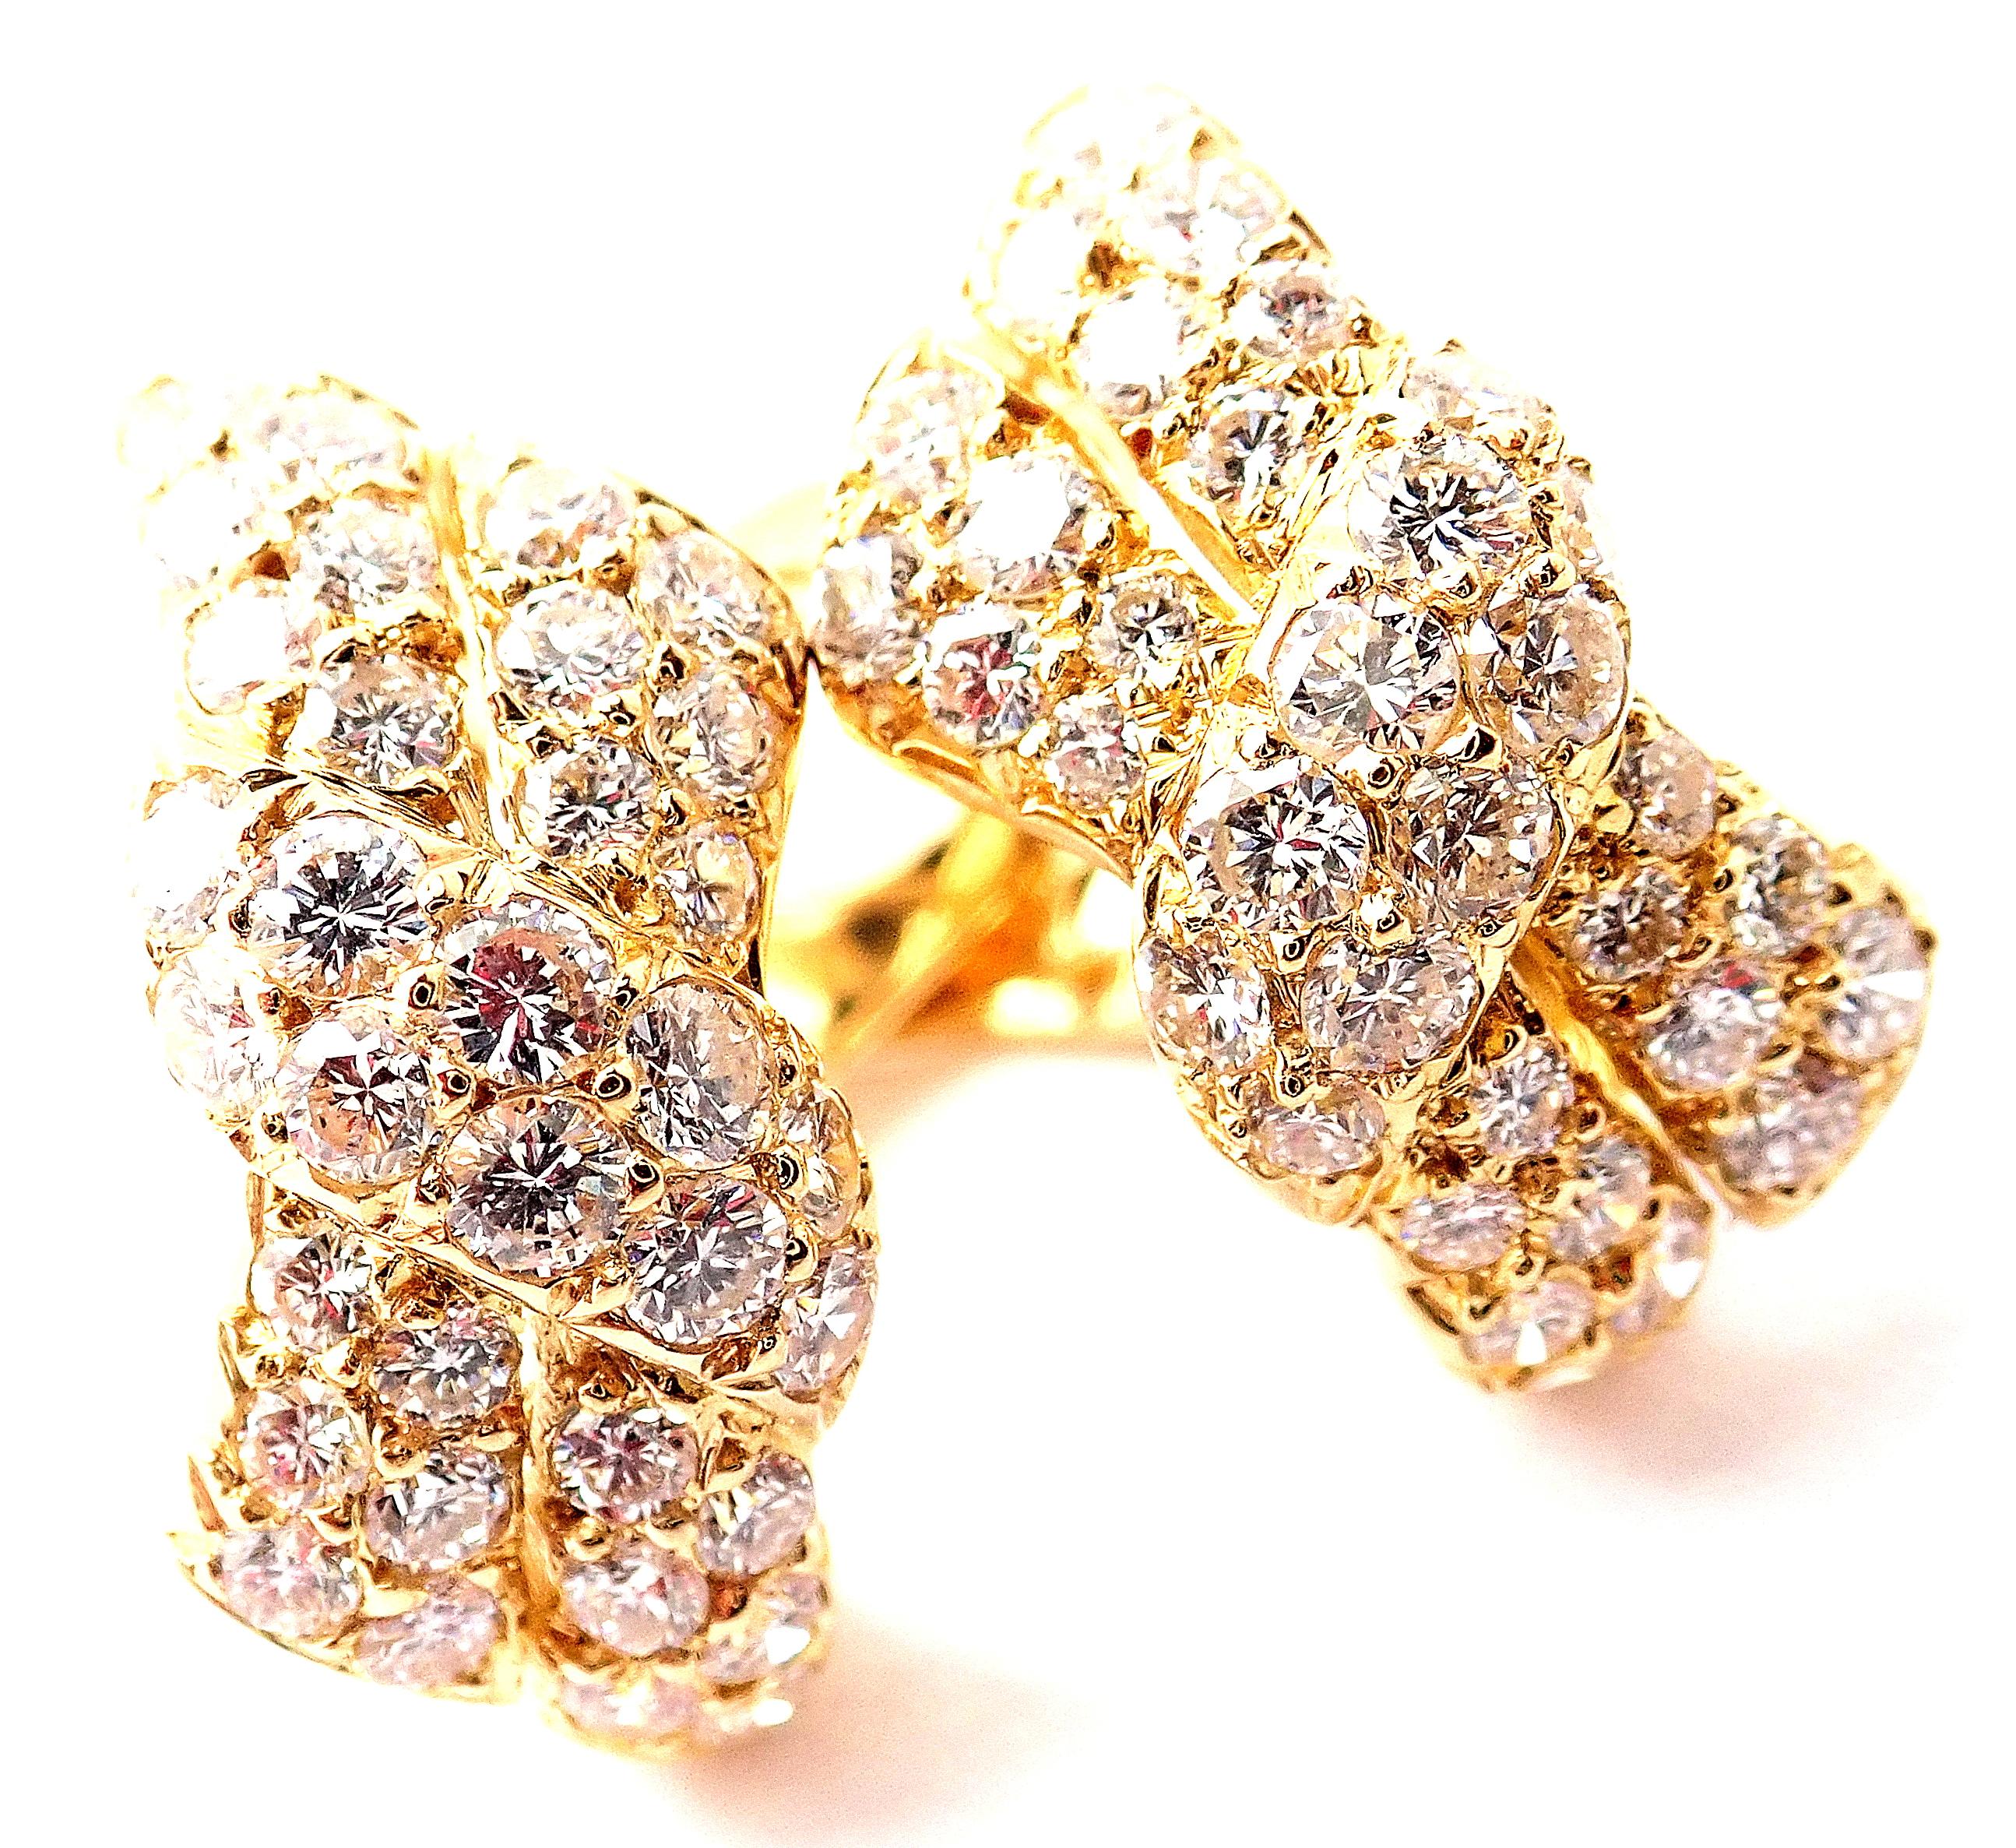 18k Yellow Gold Diamond Box Earrings by Van Cleef & Arpels. 
With 68 round brilliant cut diamonds VVS1 clarity, E color total weight approx. 2ct
These earrings come with Van Cleef & Arpels service paper from a VCA store.
***These earrings are for